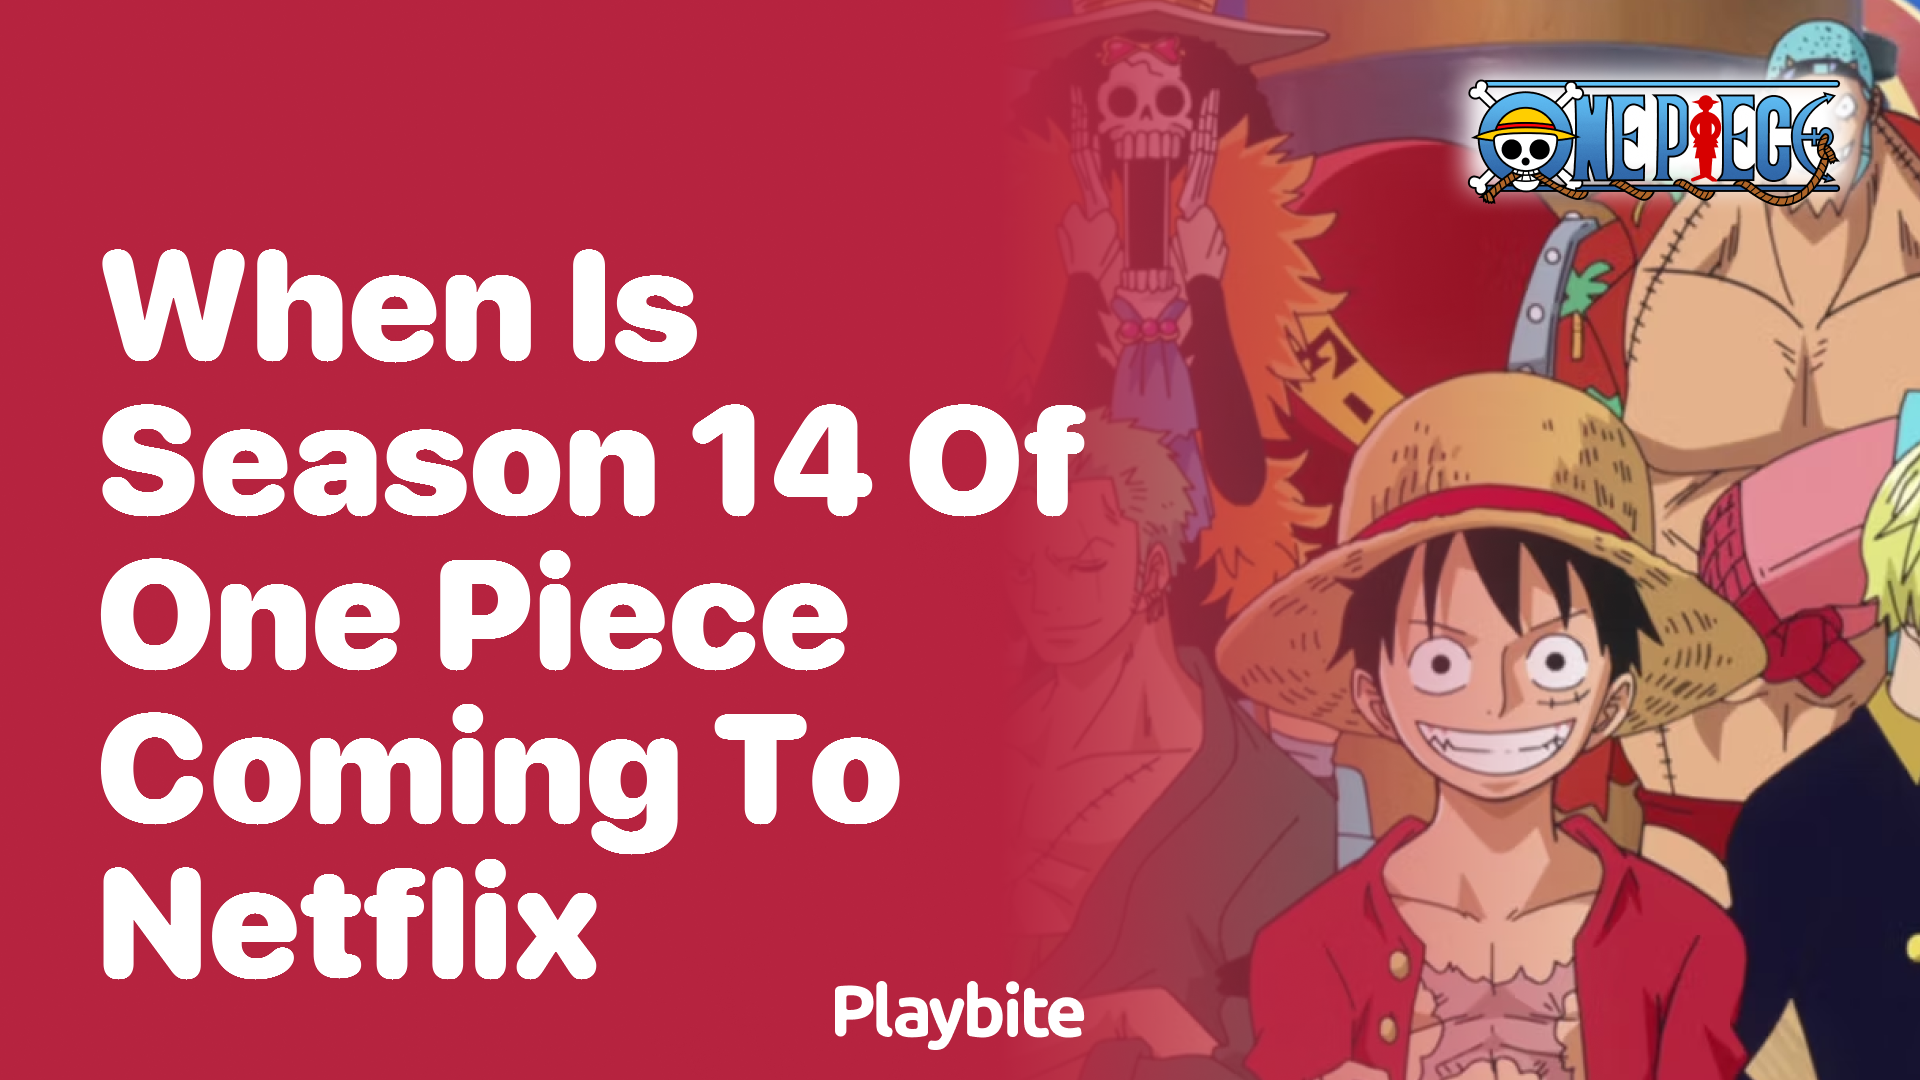 When Is Season 14 of One Piece Coming to Netflix?